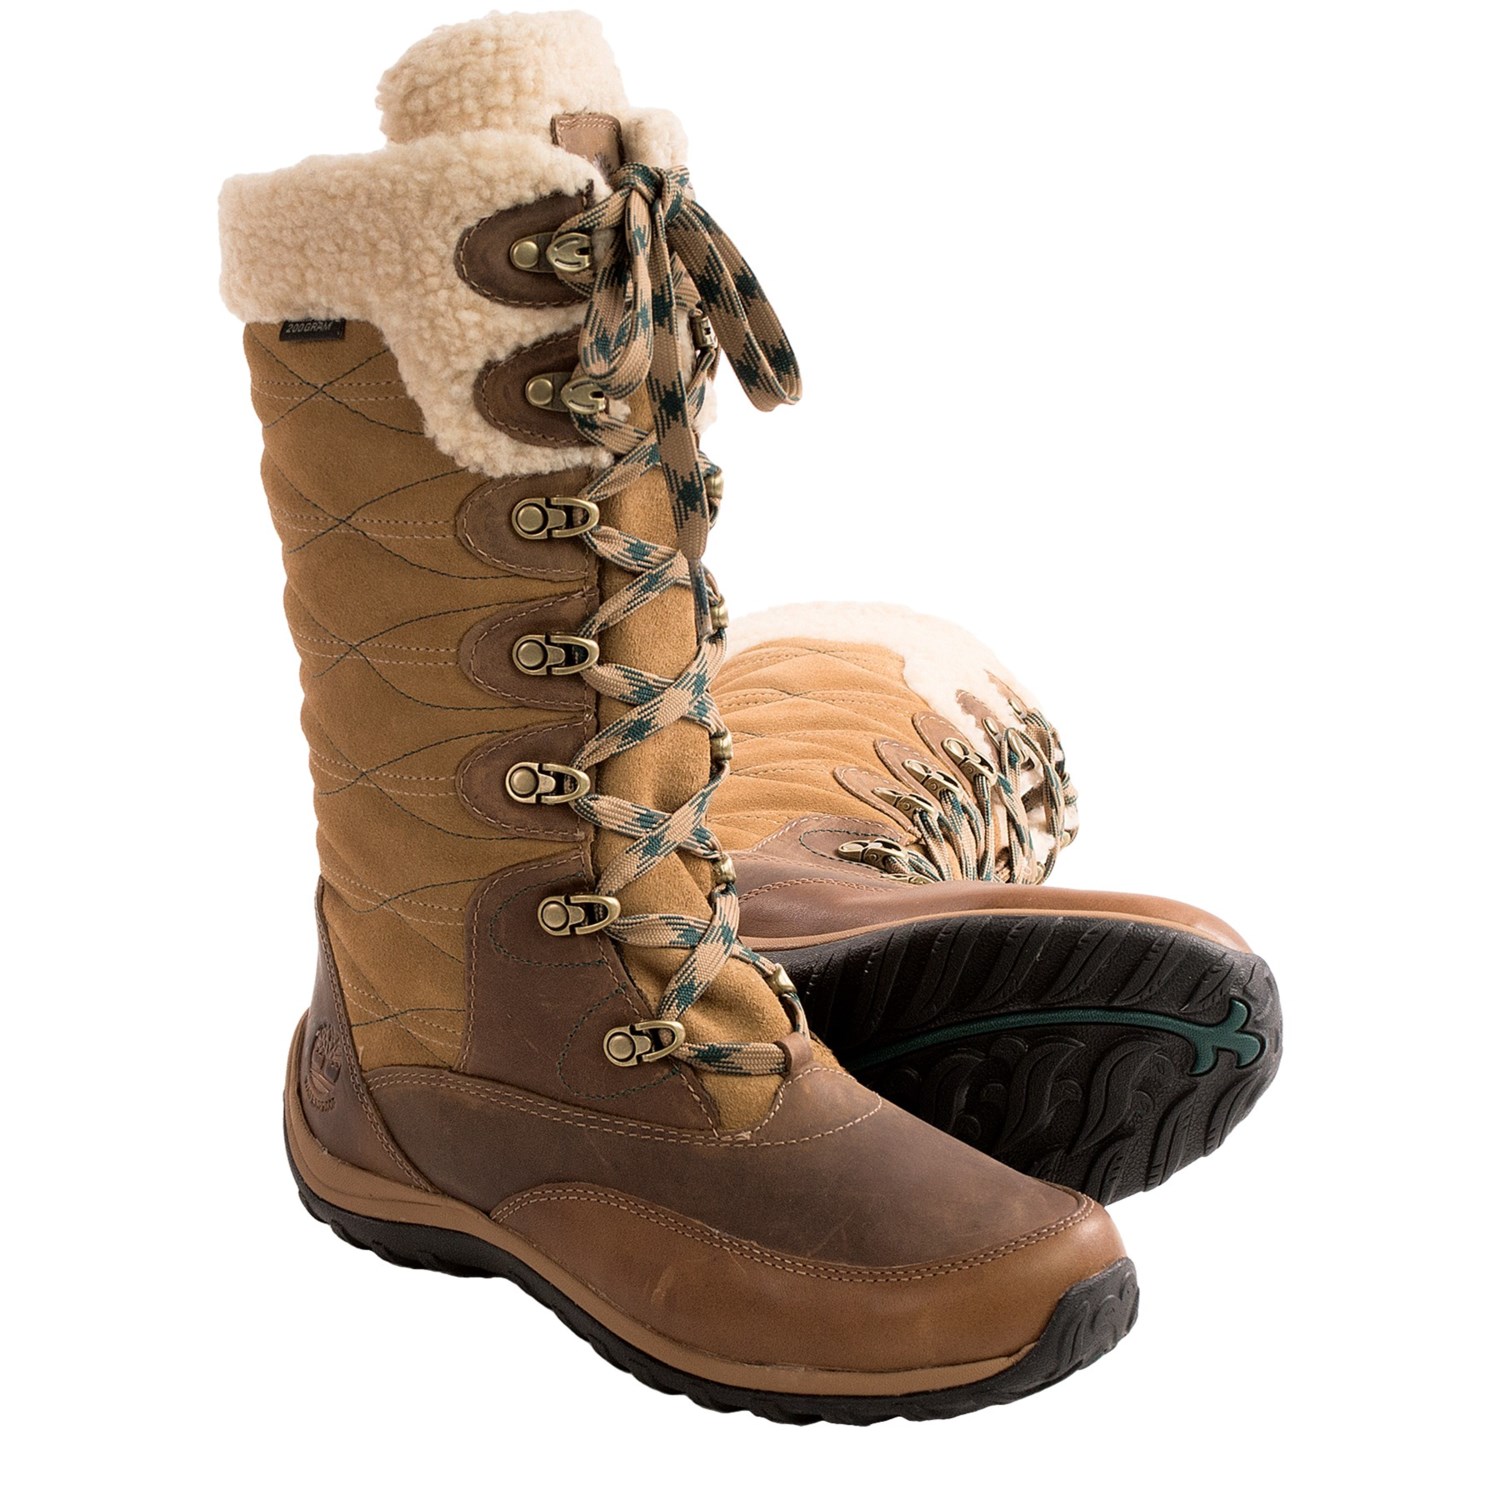 Timberland EK Willowood Snow Boots - Waterproof, Insulated (For Women